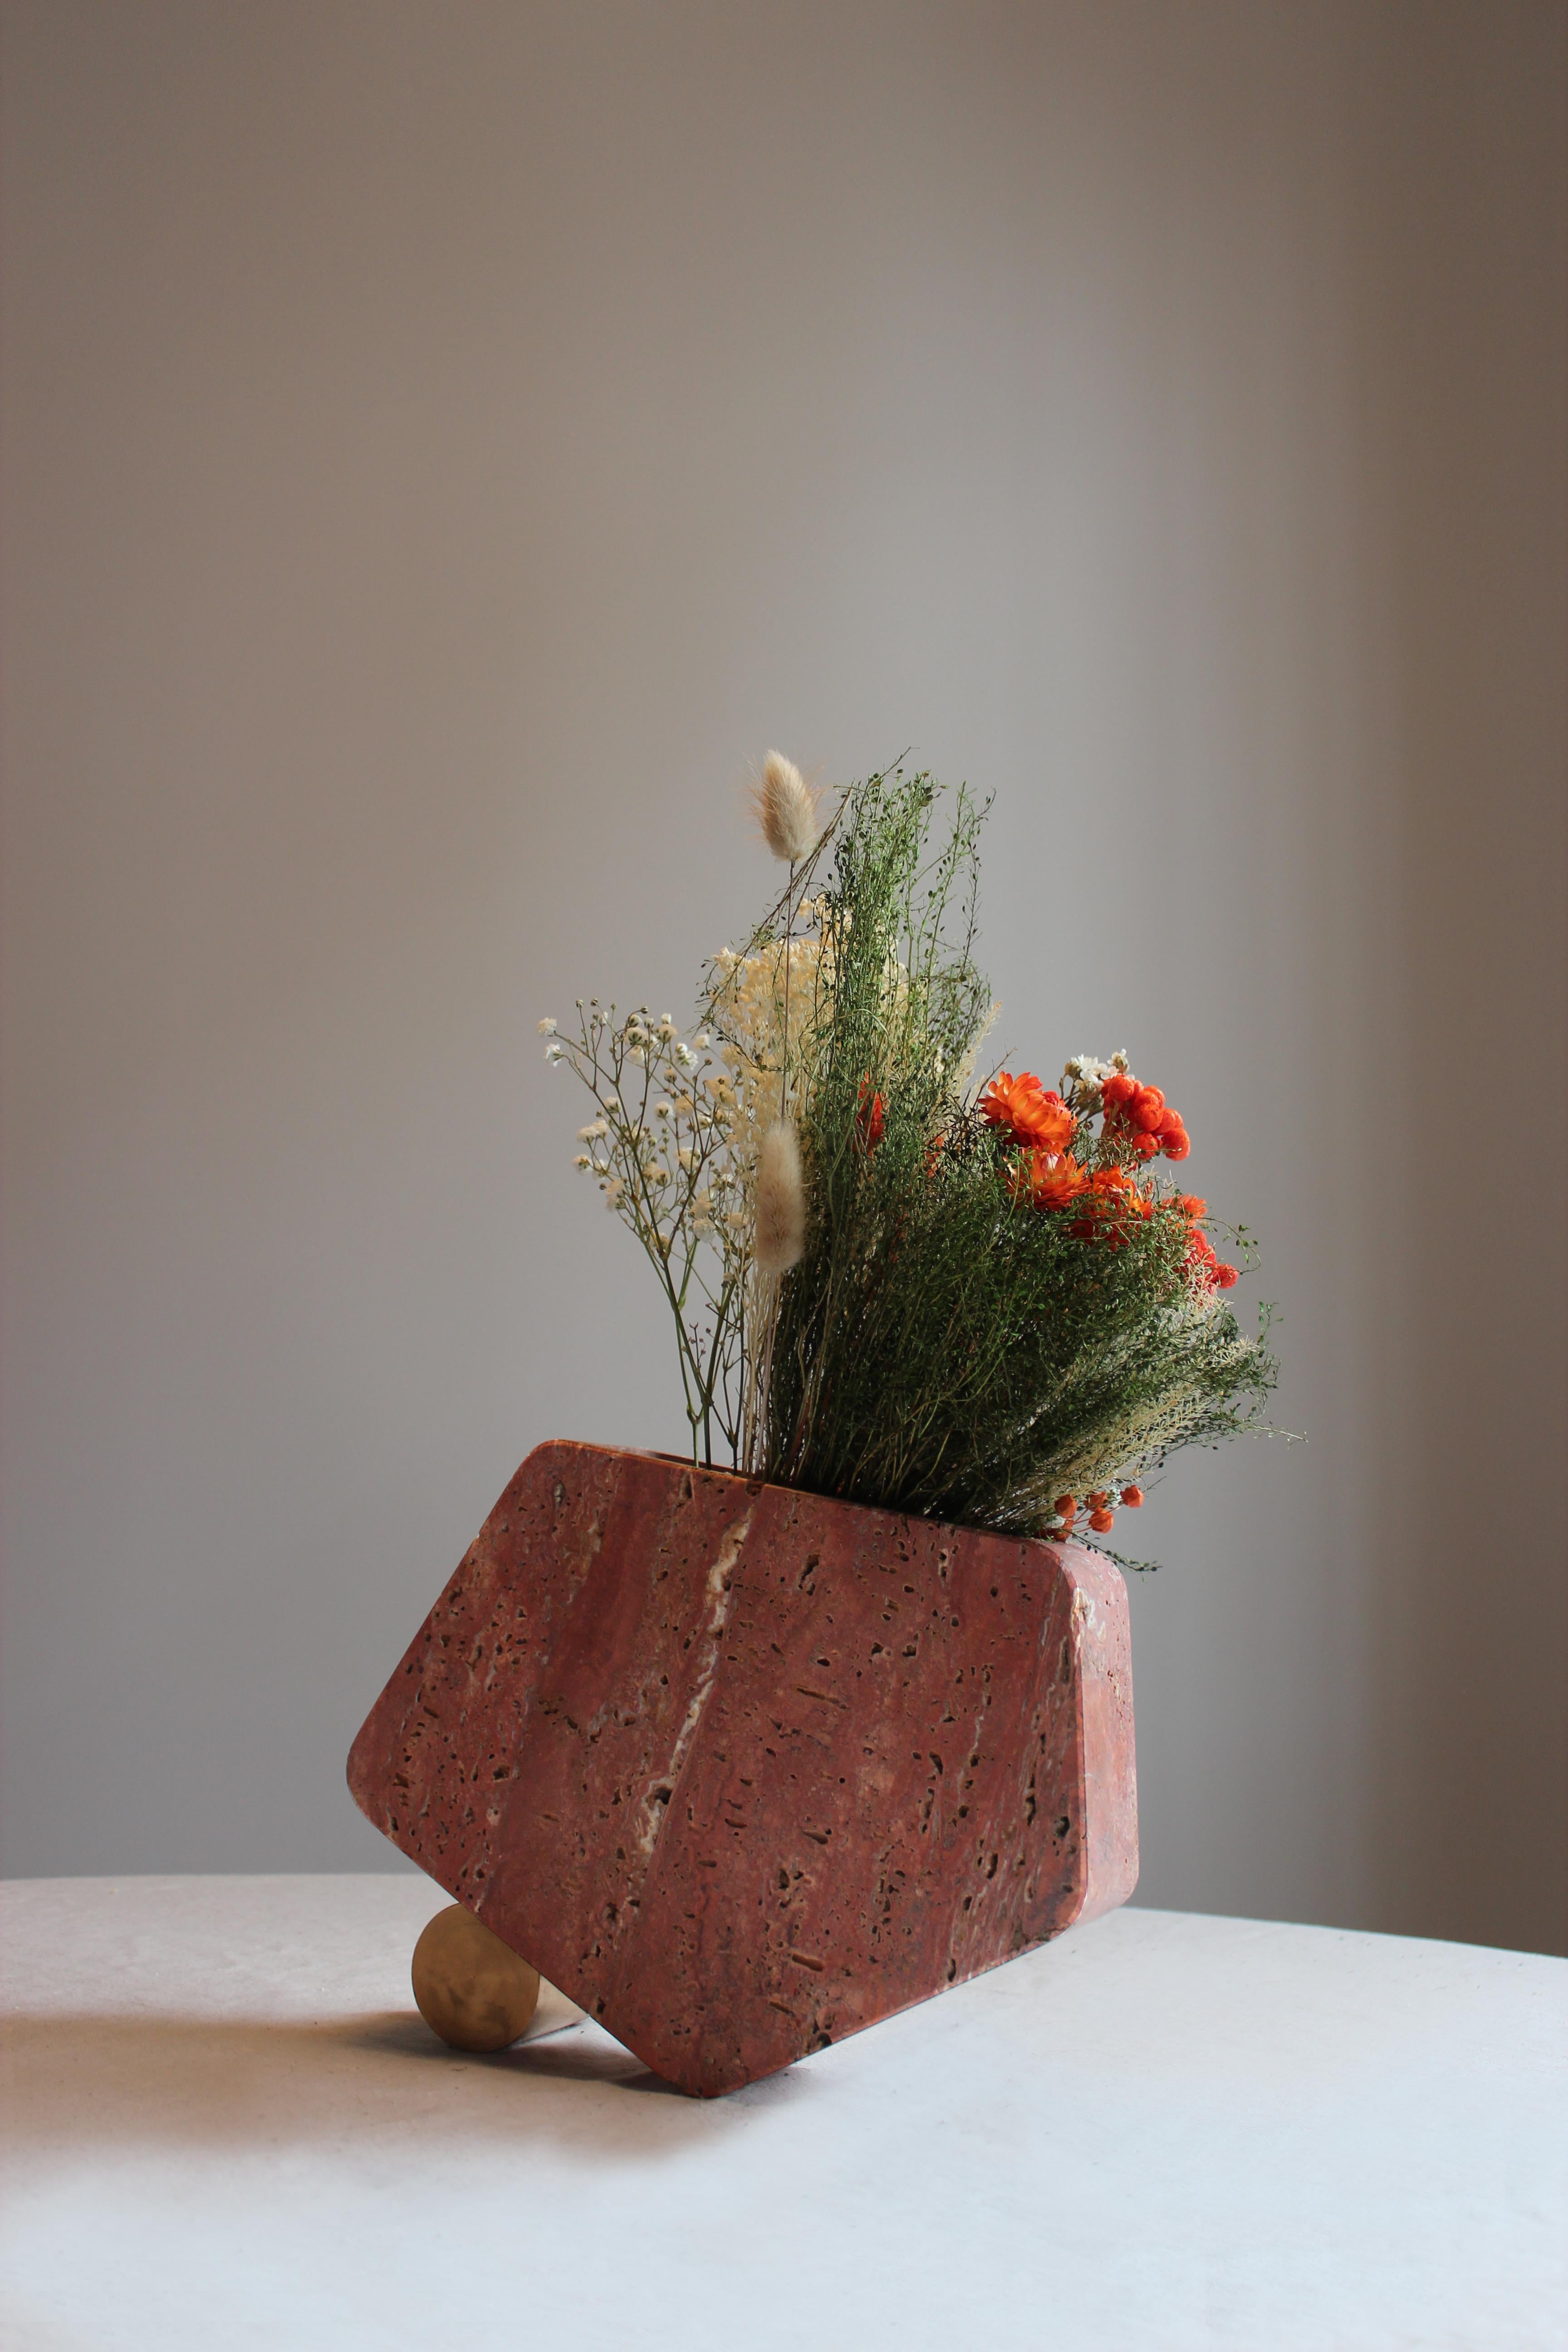 The Rolling Vase #3 is the result of the sculptural work made from our Atelier in order to generate a dialogue between two really different and contrasting materials. The Travertine presents itself in its intense Red colour and its porosity which is